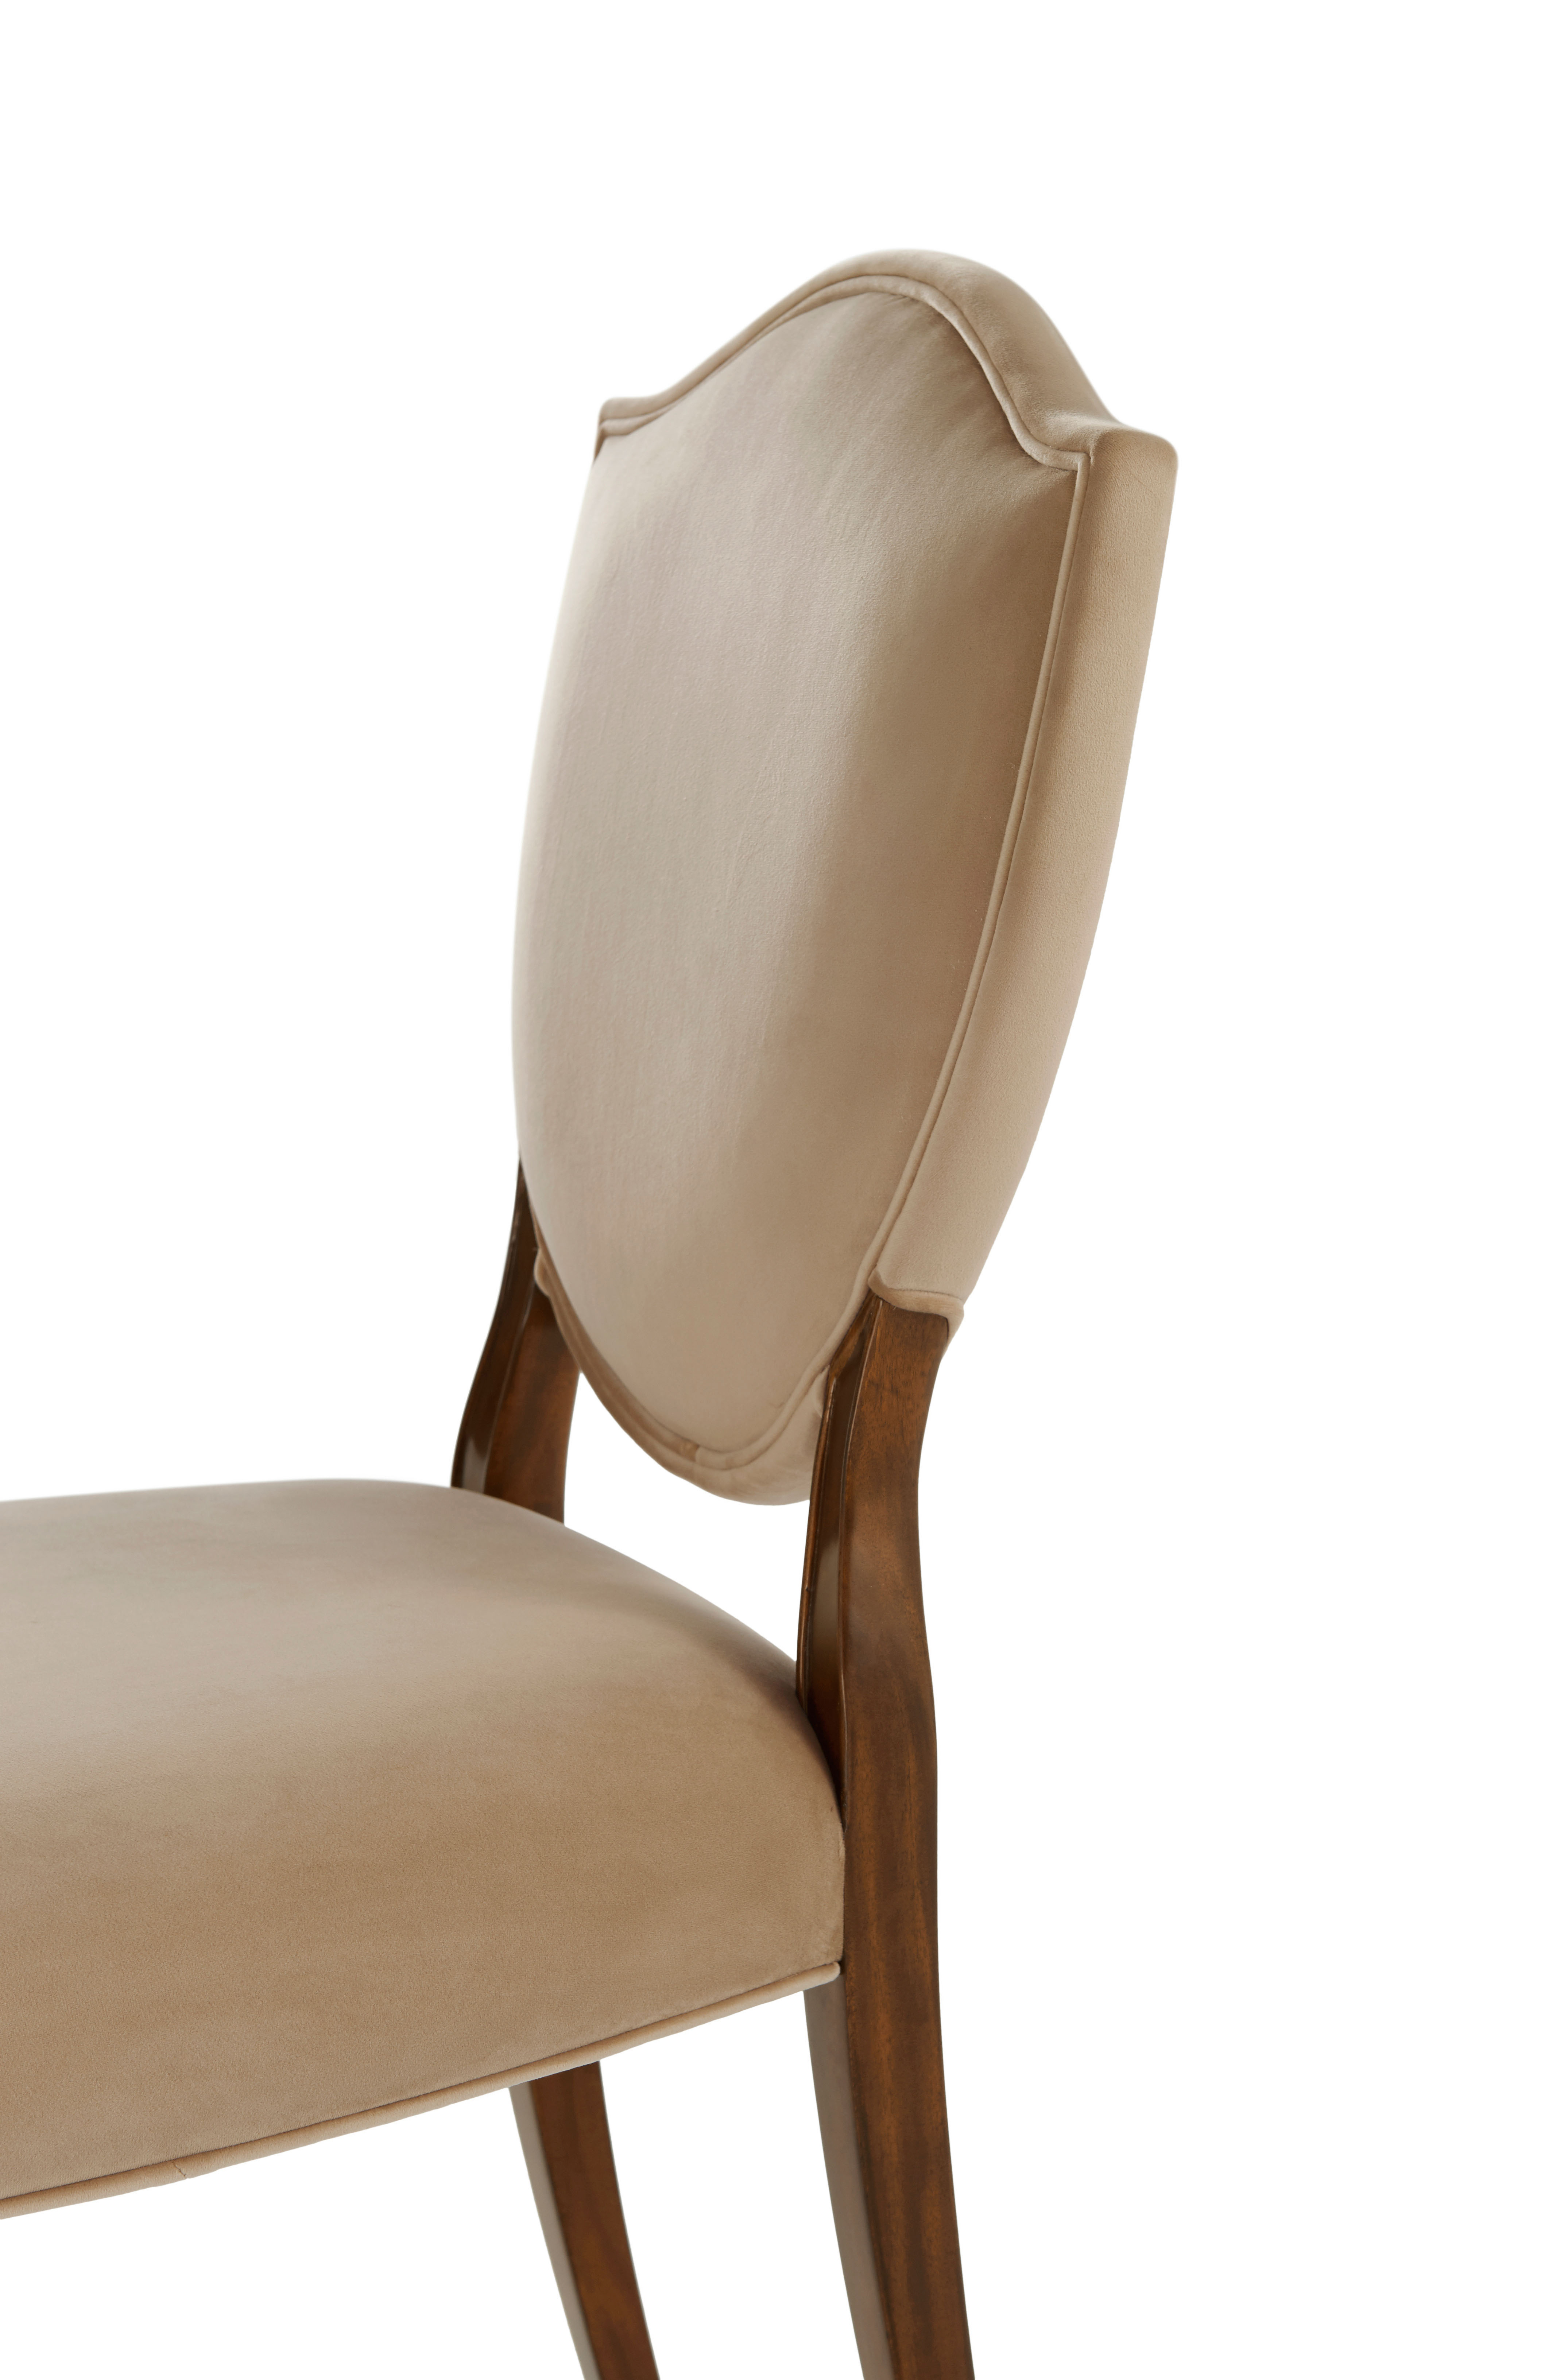 THE HOLBORN DINING SIDE CHAIR